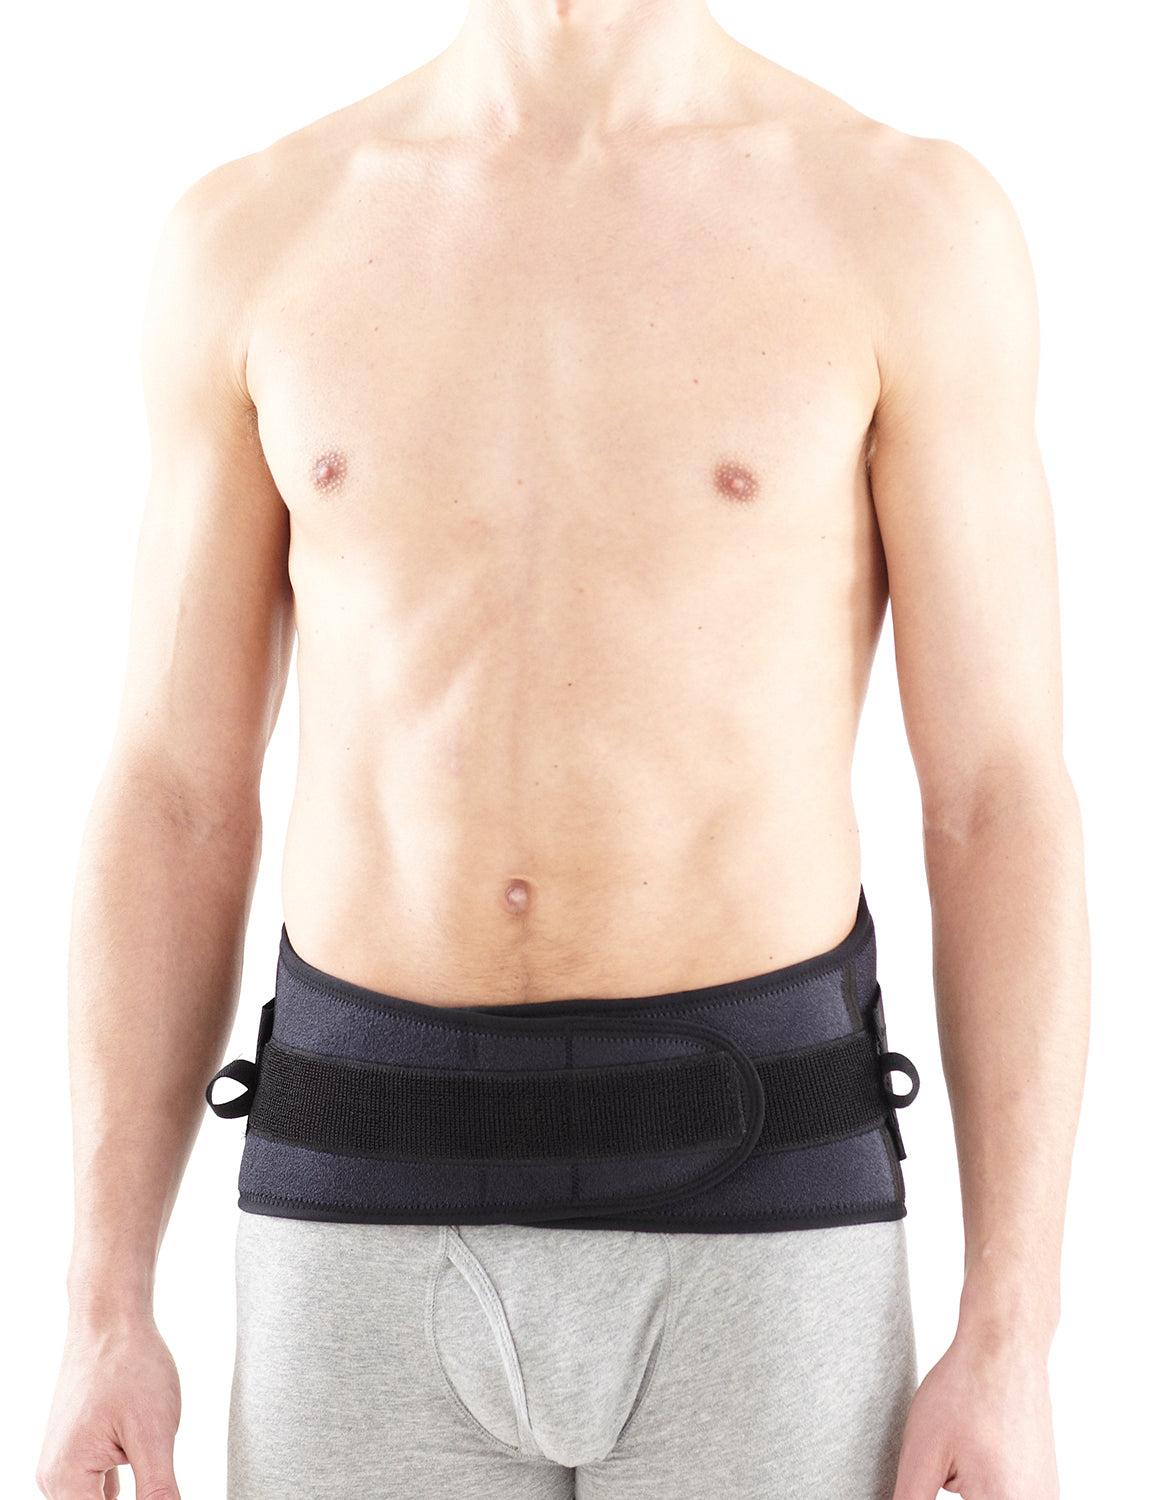 Lower Back Brace with Suspenders for Lumbar Support - NeoHealth